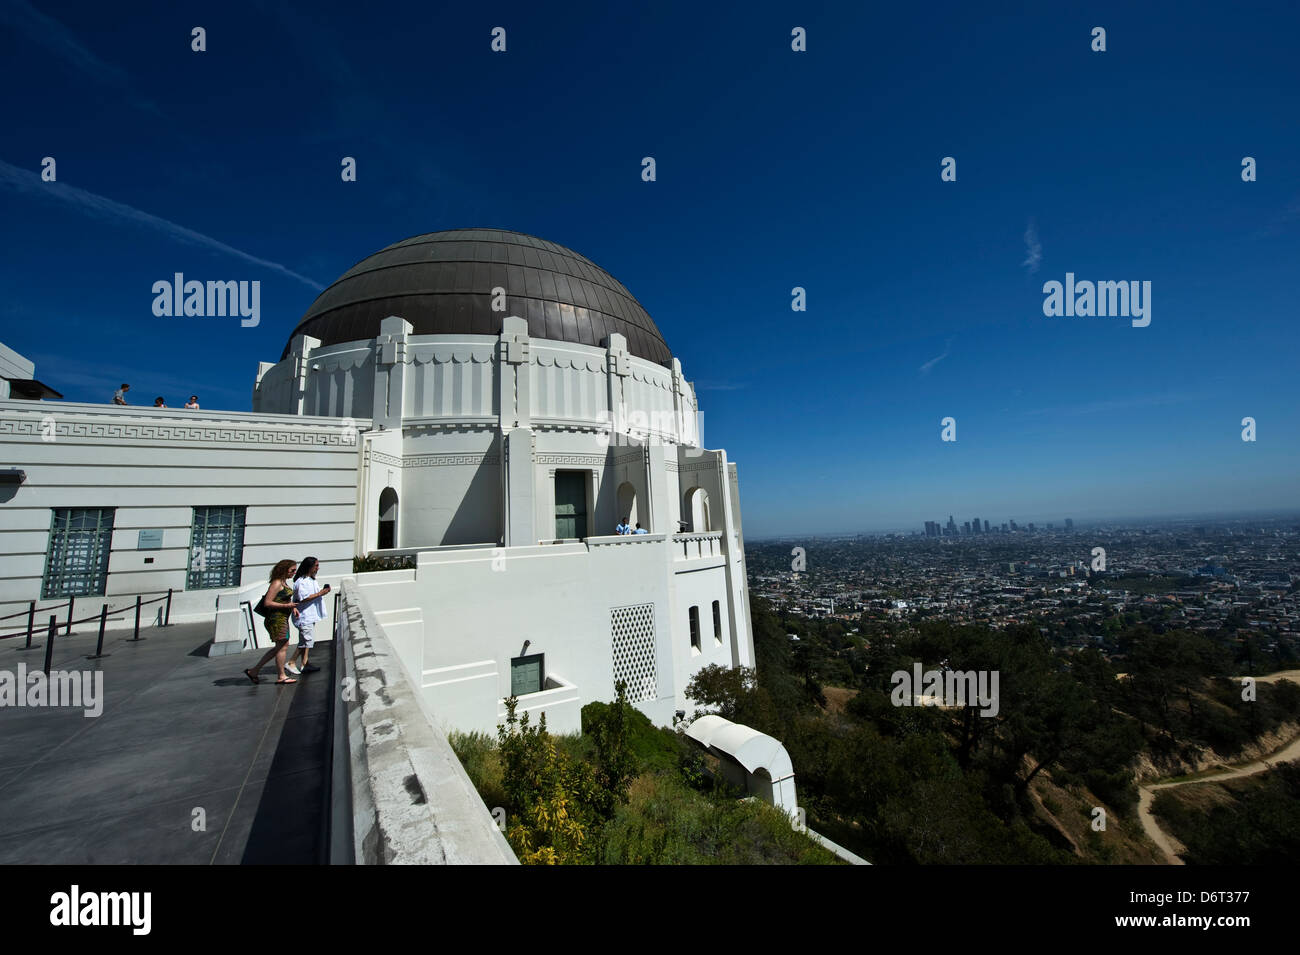 Los Angeles, California, April 11, 2013: a view of Griffith Observatory. A wide-angle, editorial, image. Stock Photo